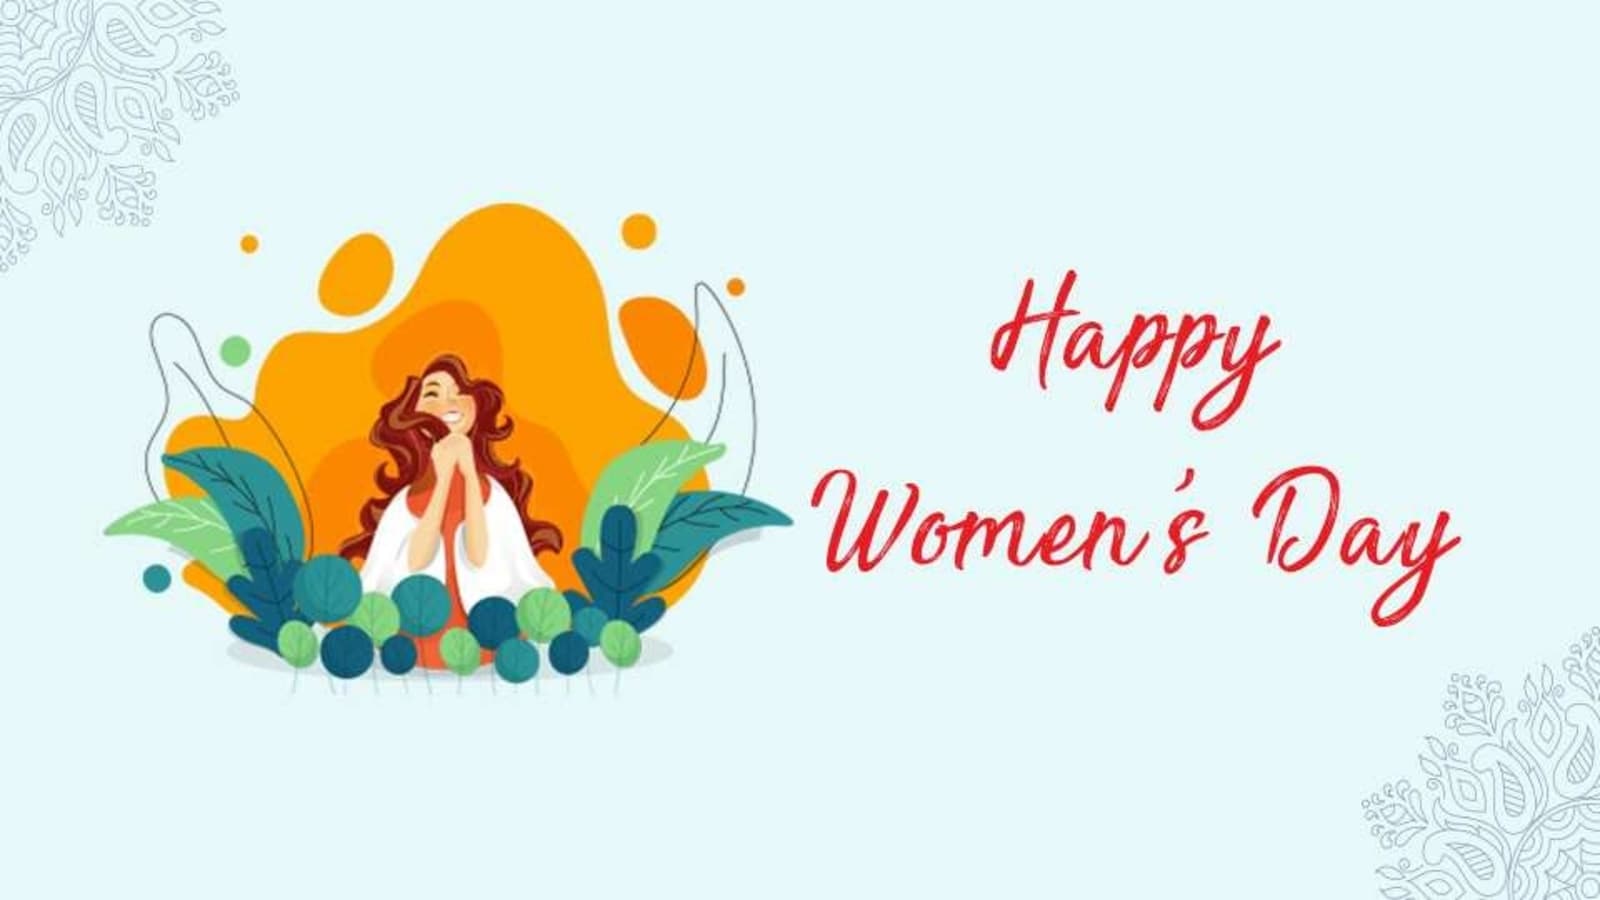 Women's Day 2021: Wishes, image, quotes to share with your special ladies